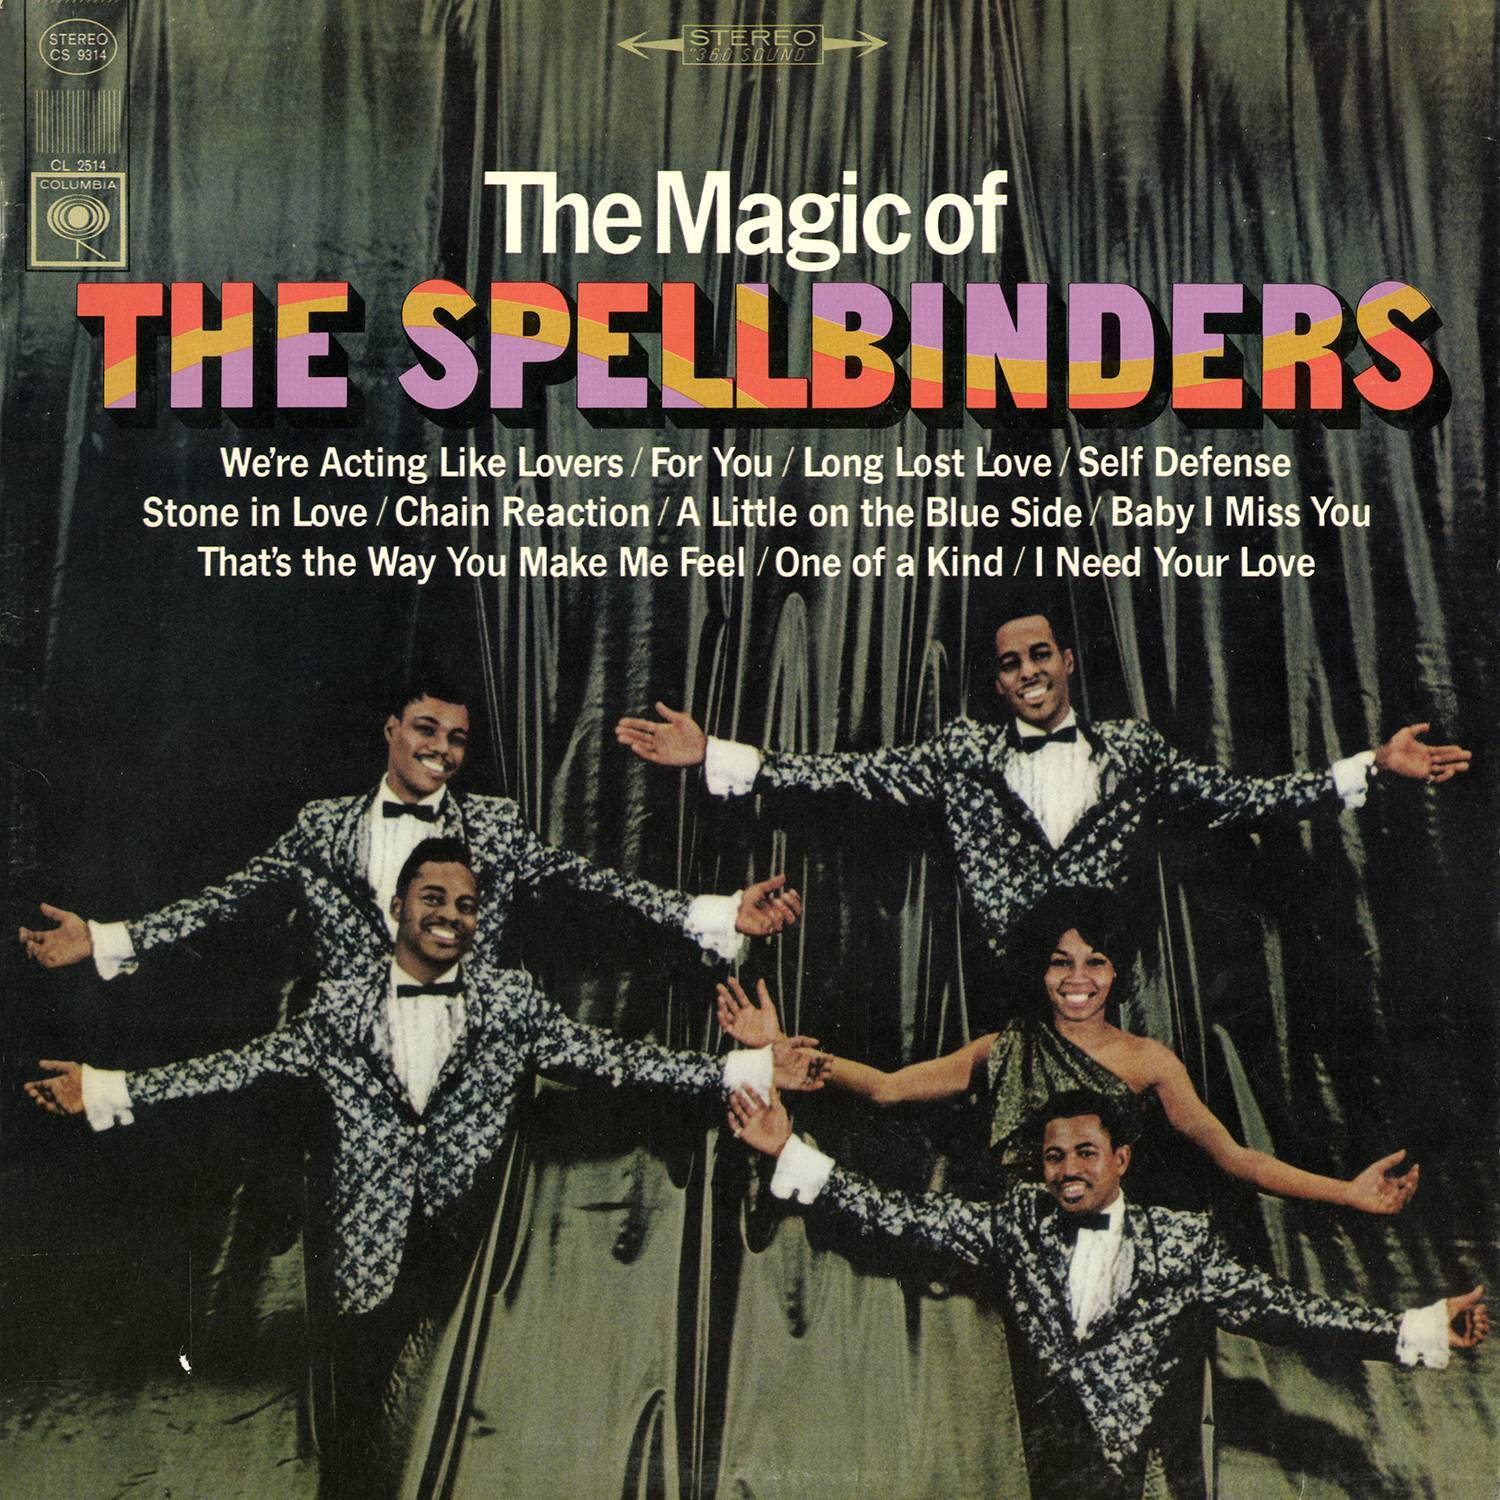 The Spellbinders – The Magic Of The Spellbinders (1966/2016) [AcousticSounds FLAC 24bit/192kHz]